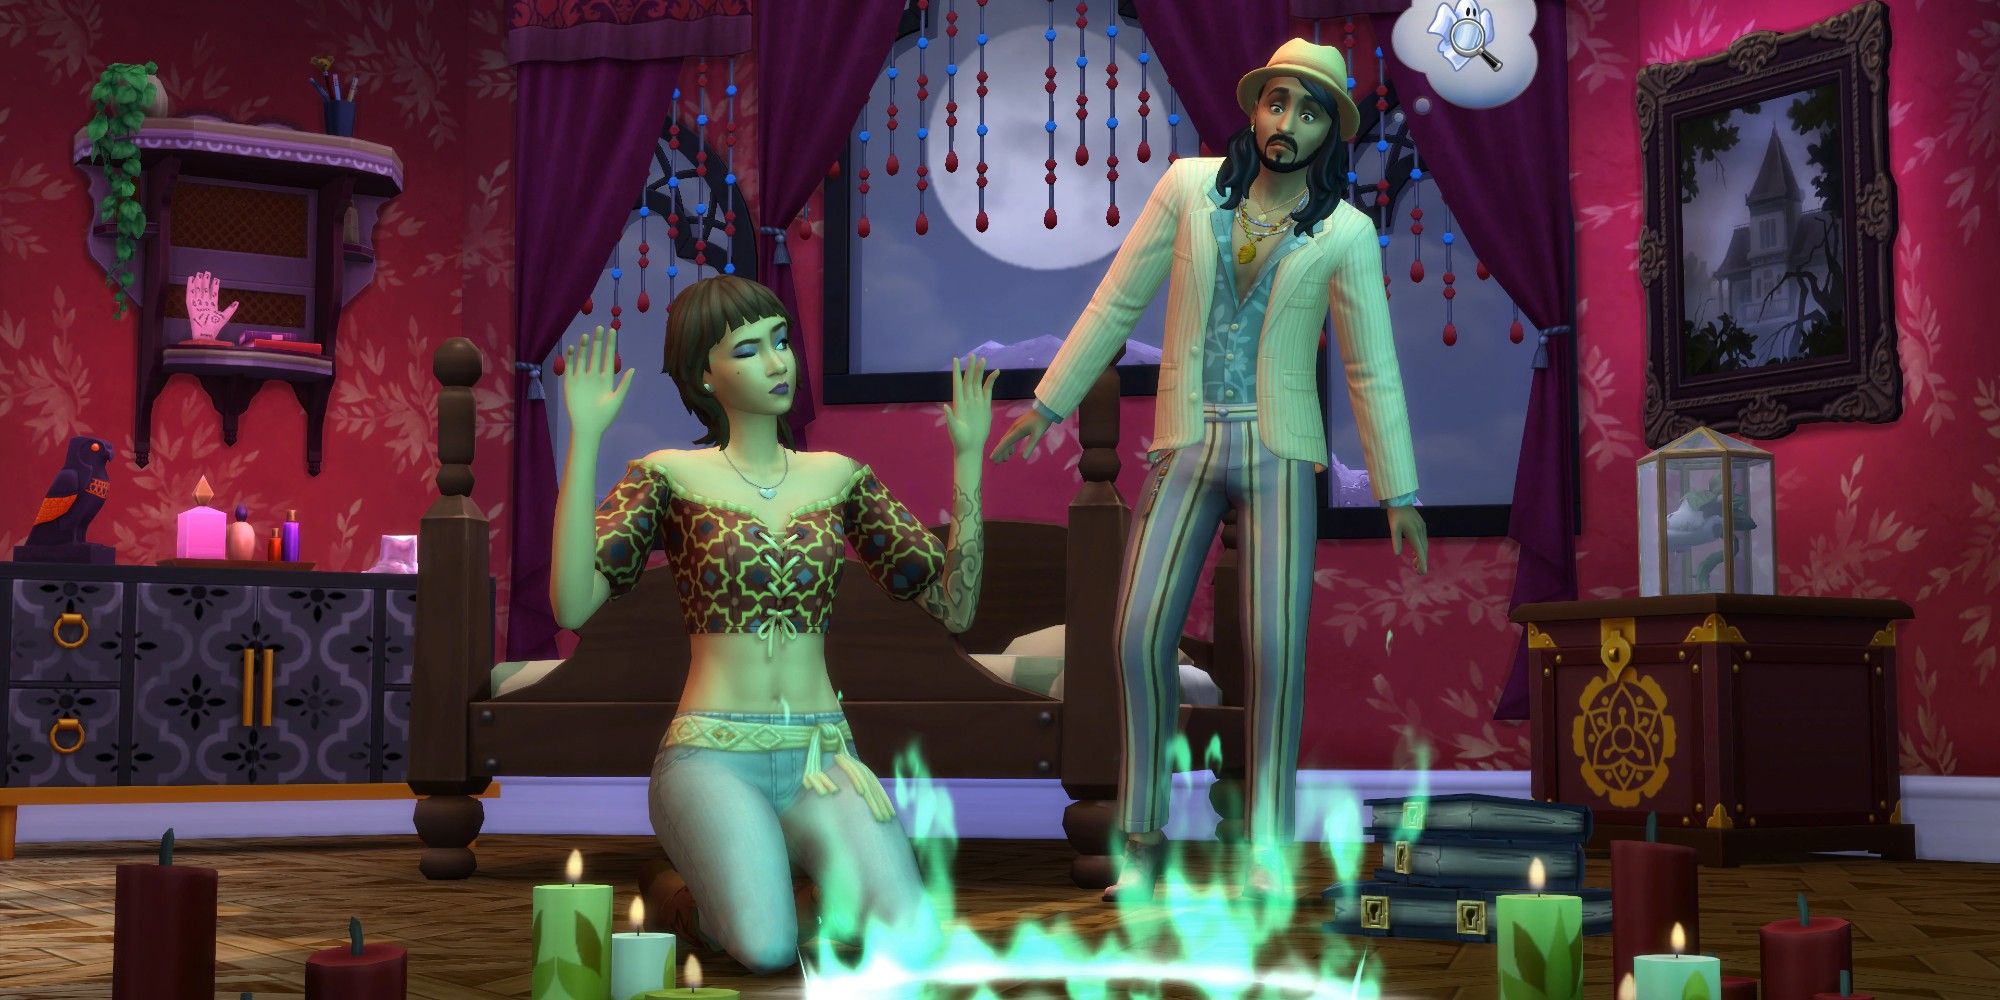 the sims 4 spooky pack review